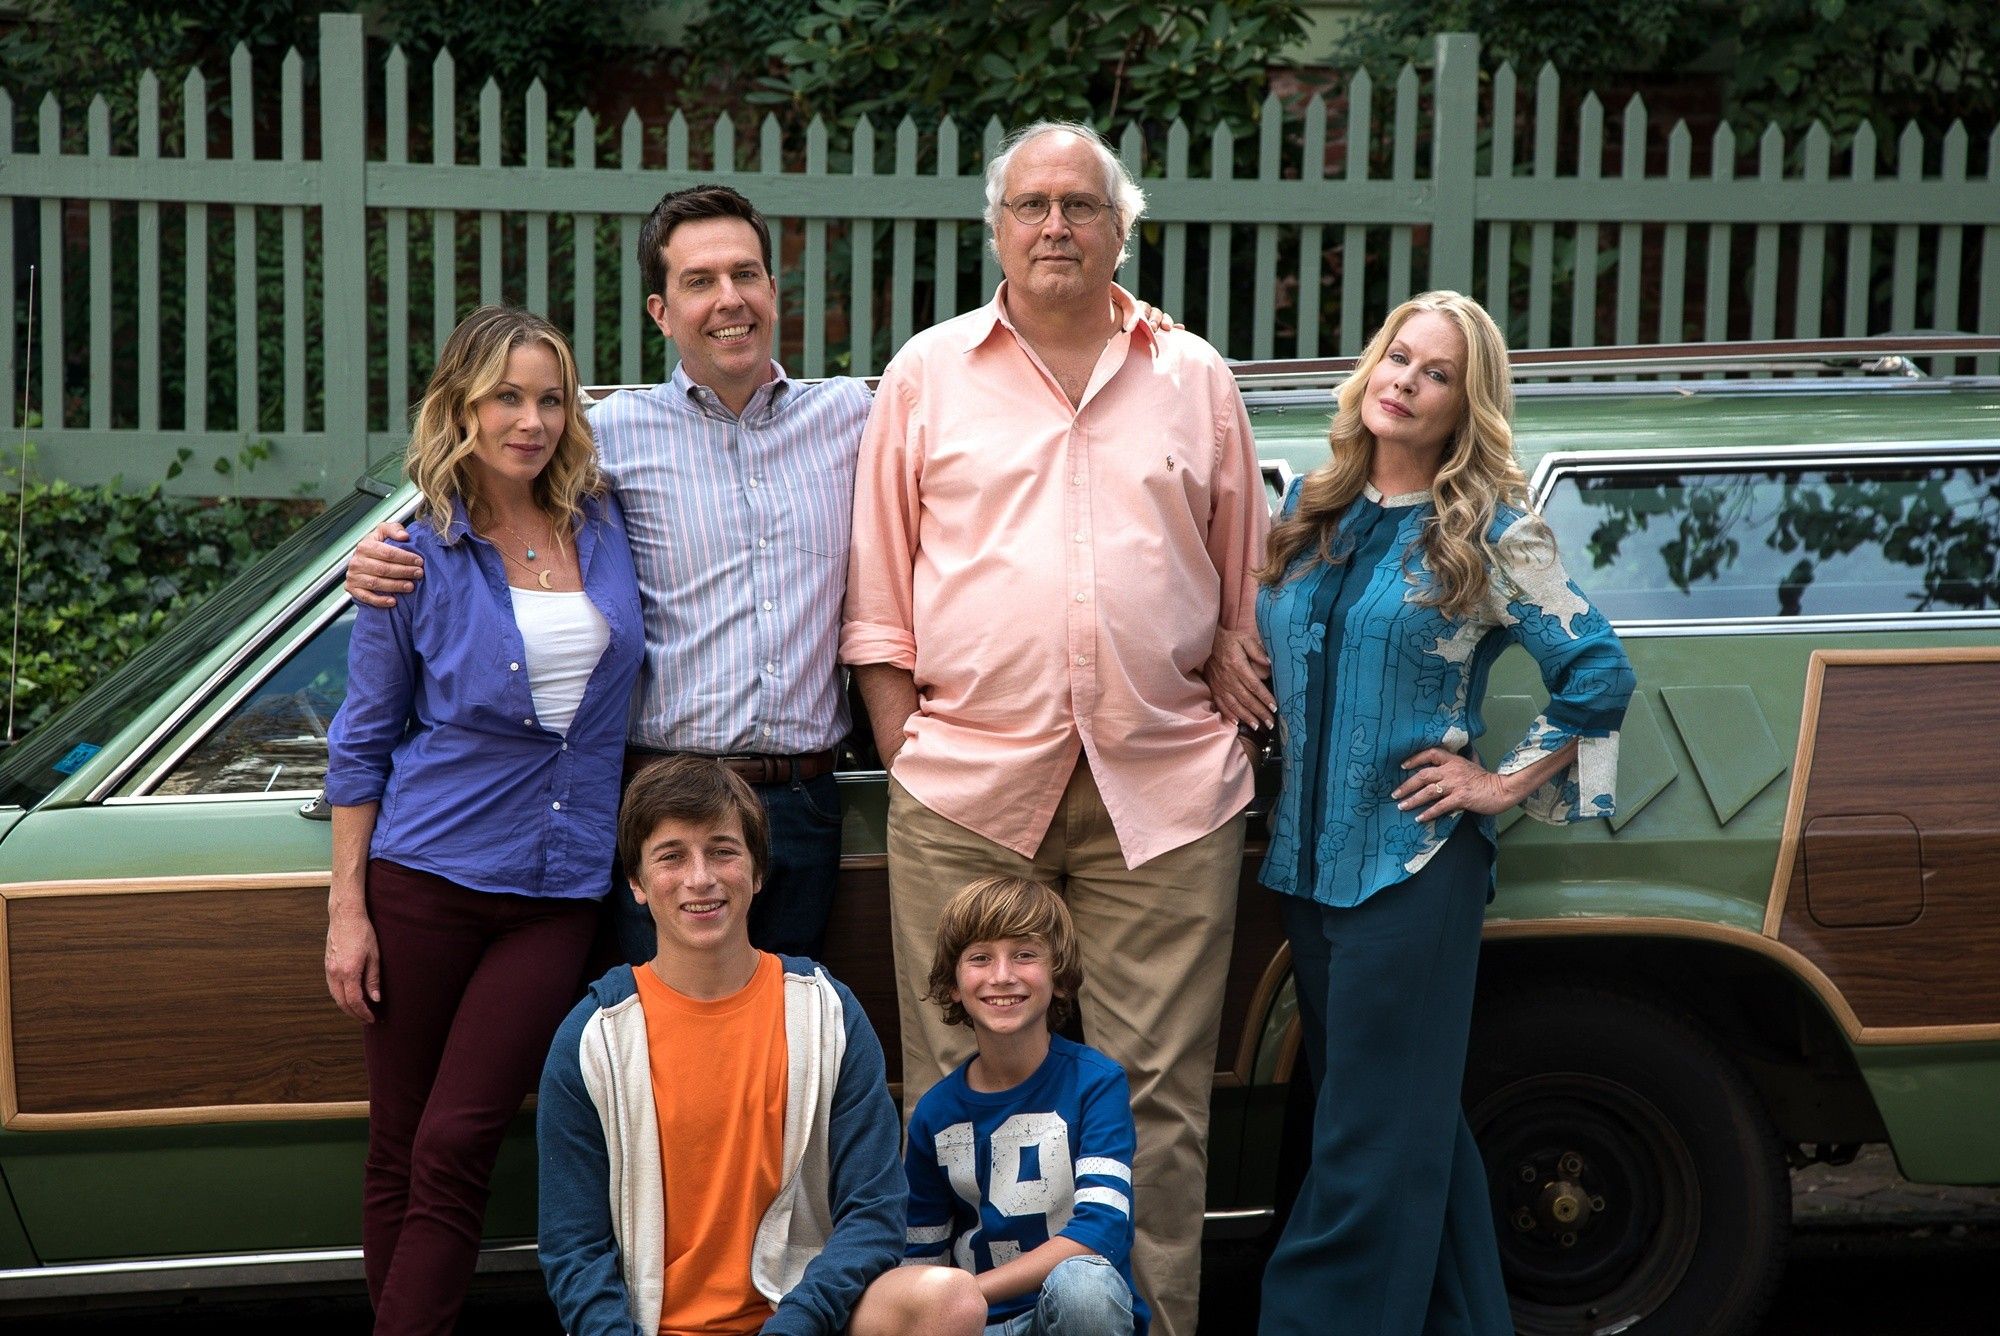 Christina Applegate, Ed Helms, Chevy Chase, Beverly D'Angelo, Skyler Gisondo and Steele Stebbins in Warner Bros. Pictures' Vacation (2015)